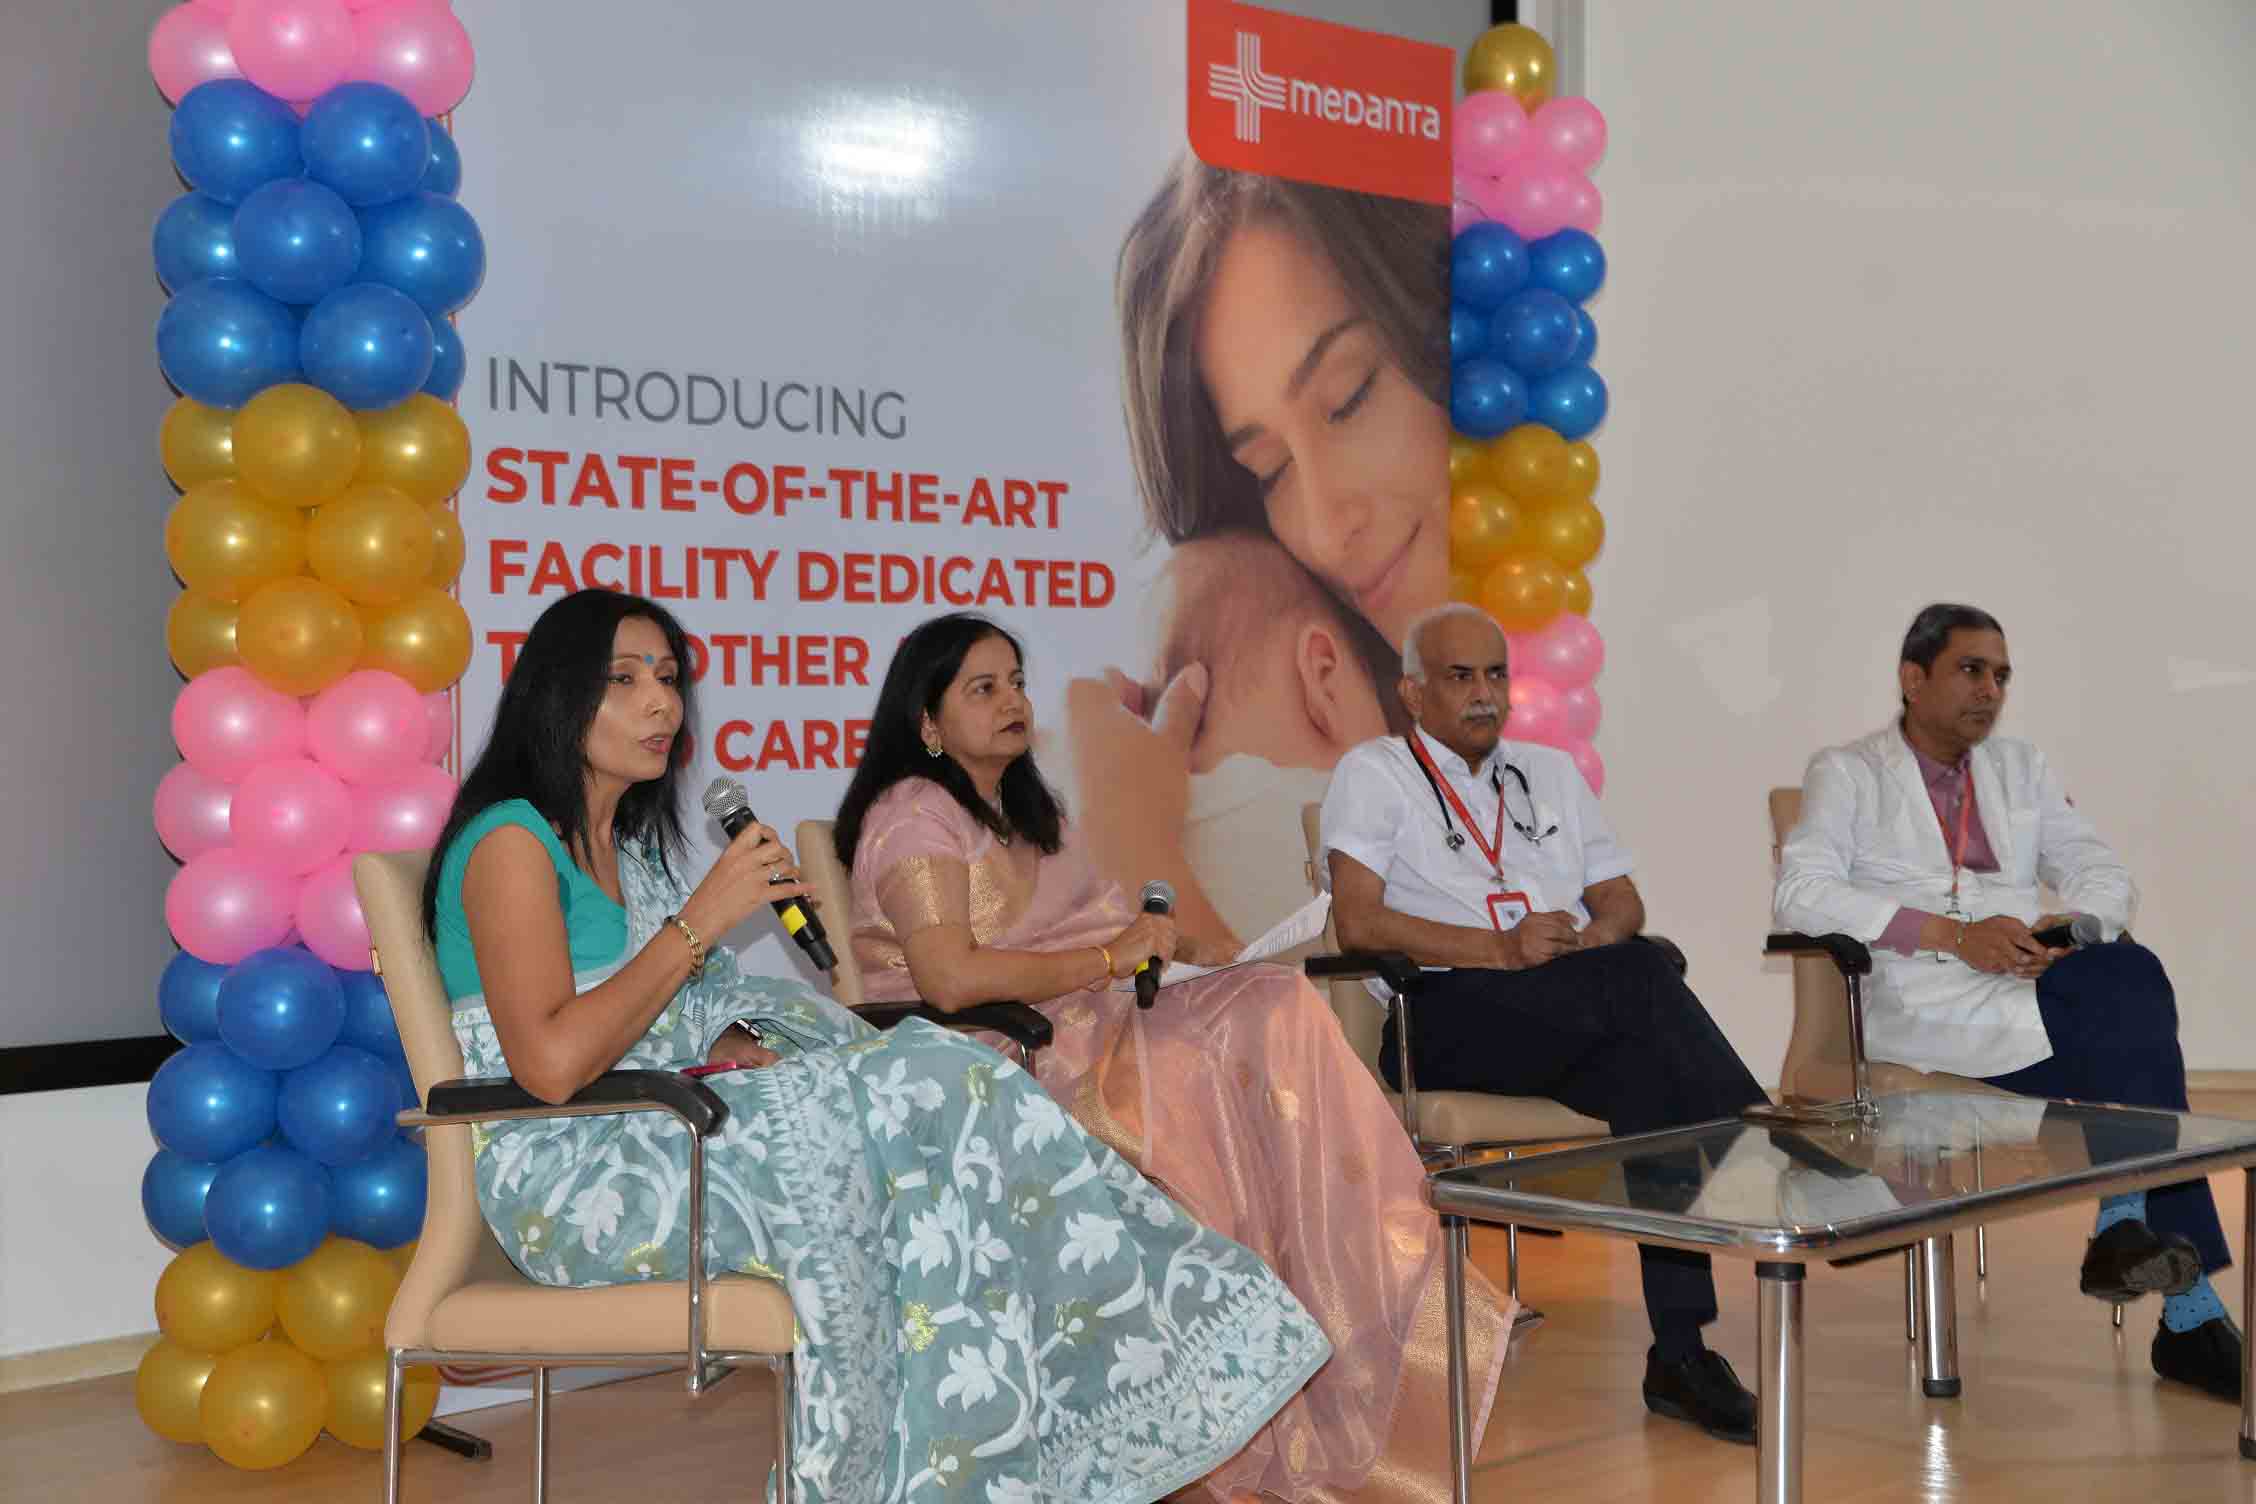 Medanta stresses the importance of holistic maternity and neonatal care amid modern parenthood challenges